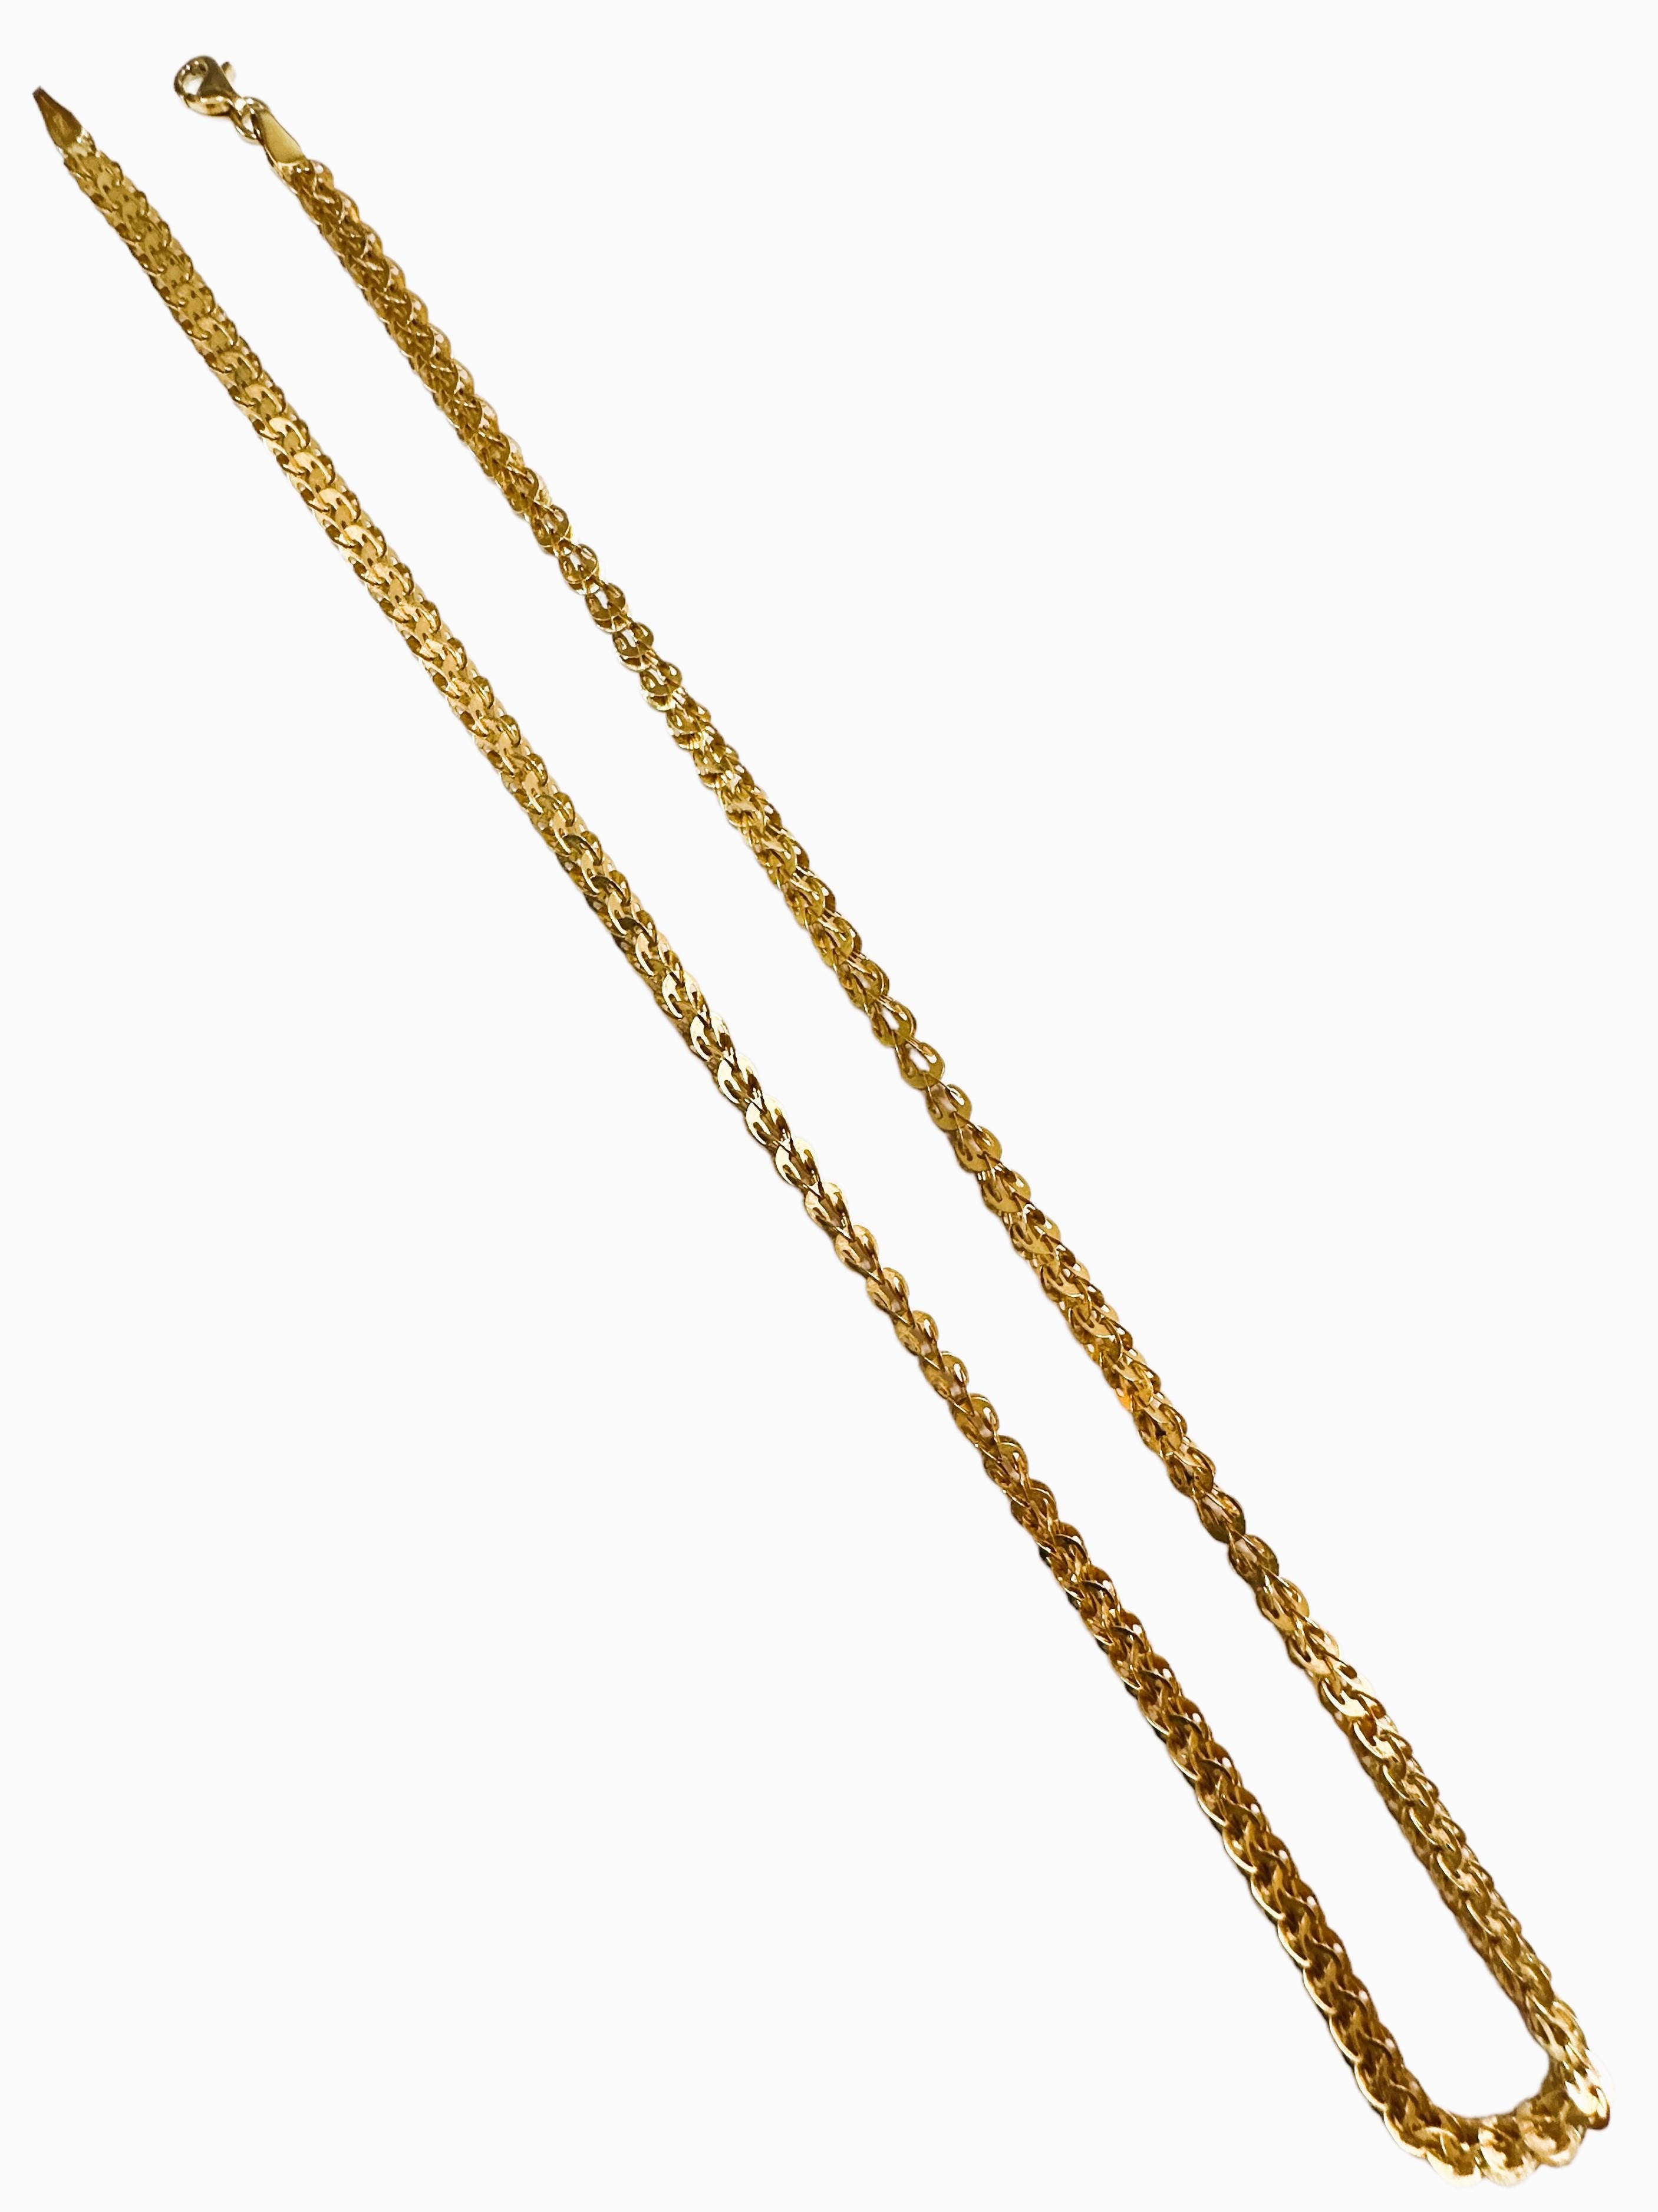 Women's 18K Yellow Gold Fancy Link Necklace Chain 16.5 Inches For Sale